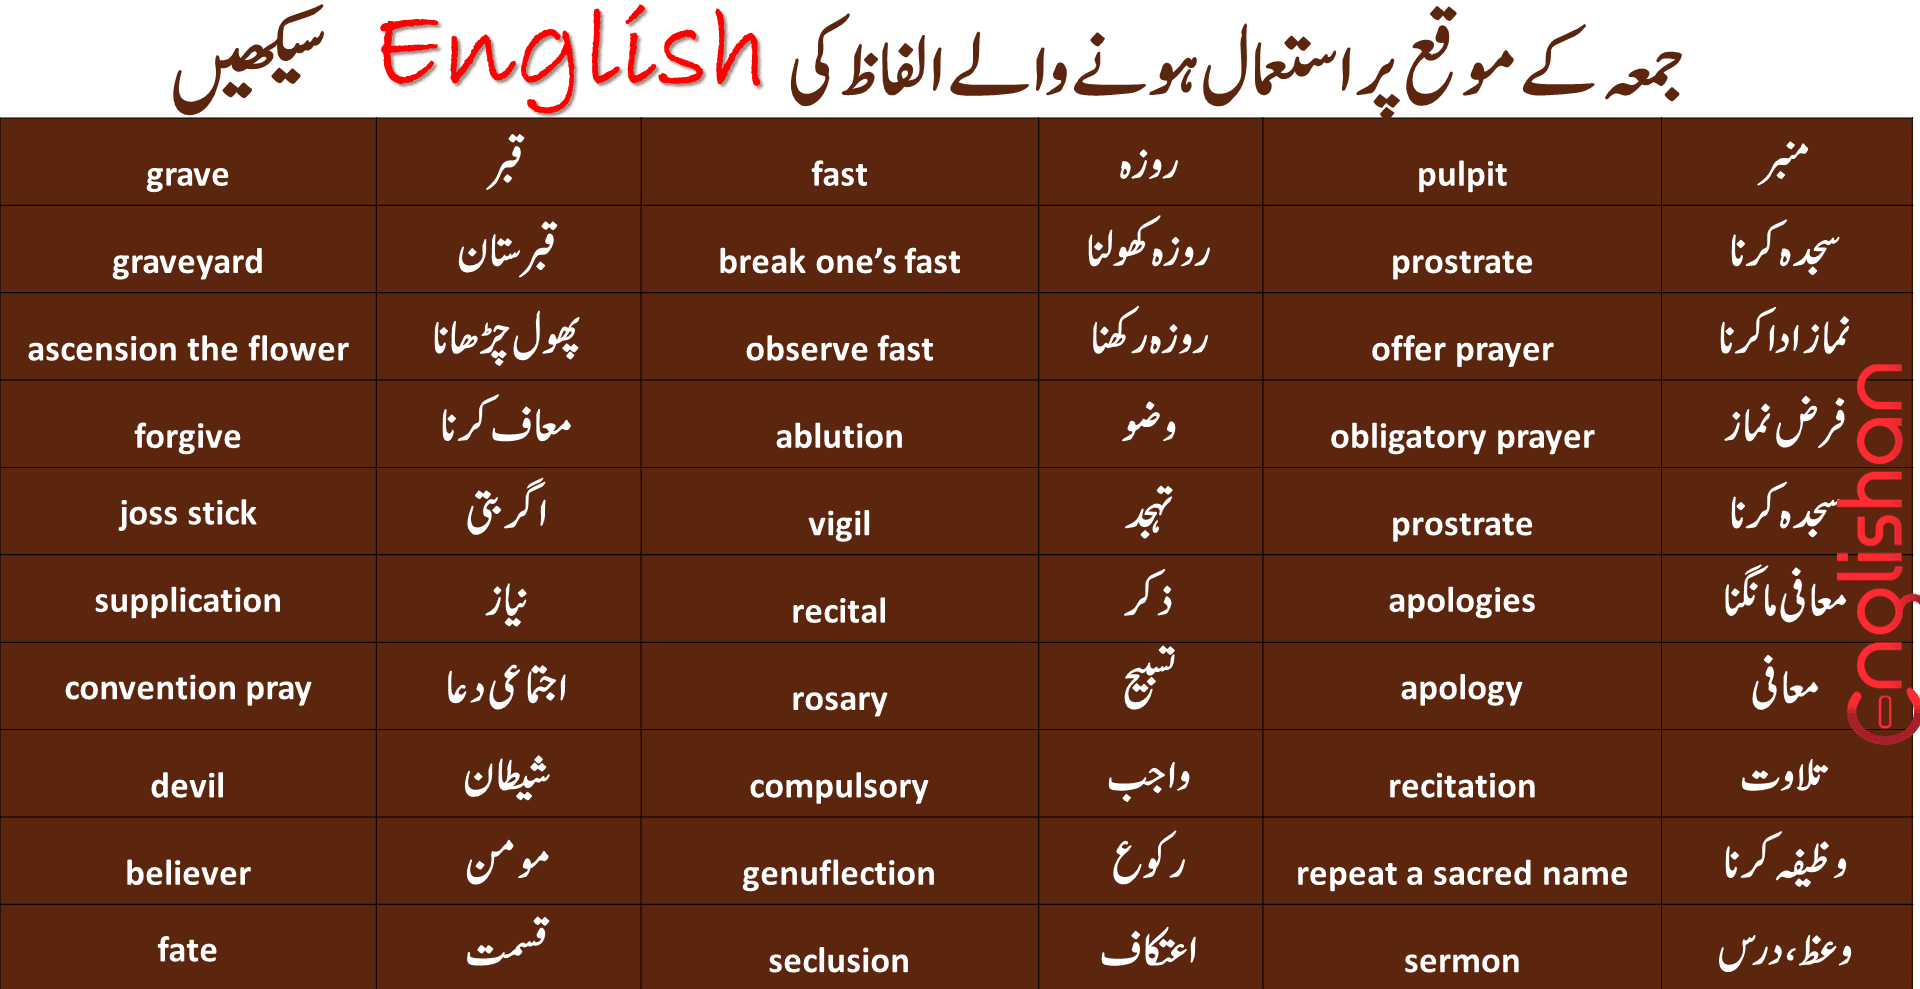 what is the meaning of homework in urdu